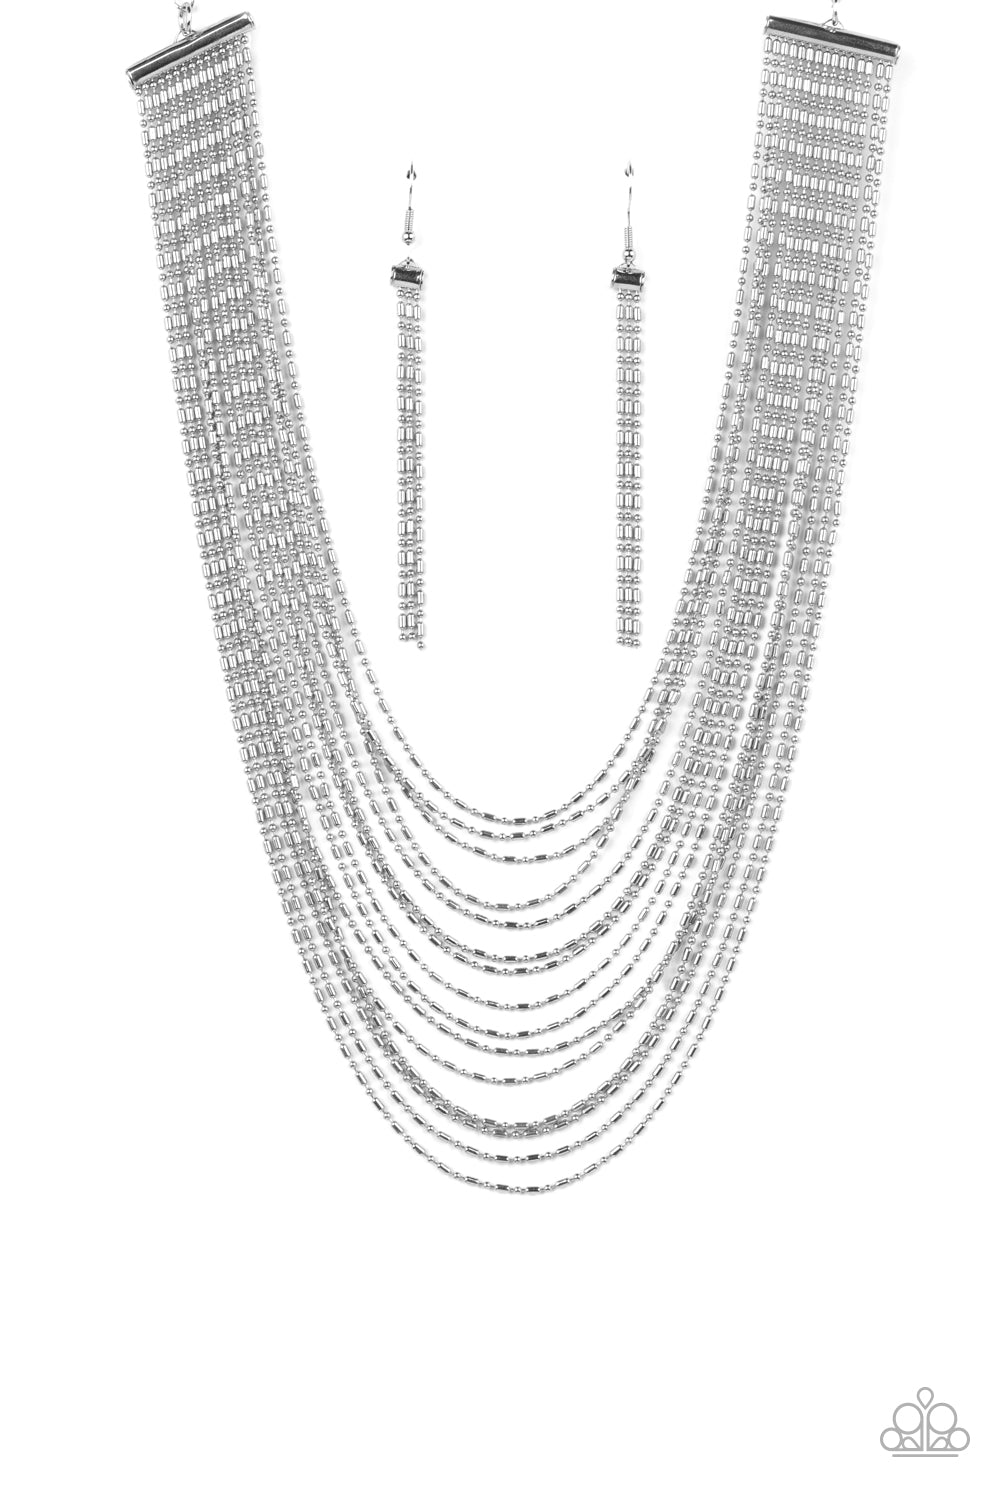 Cascading Chains - Silver